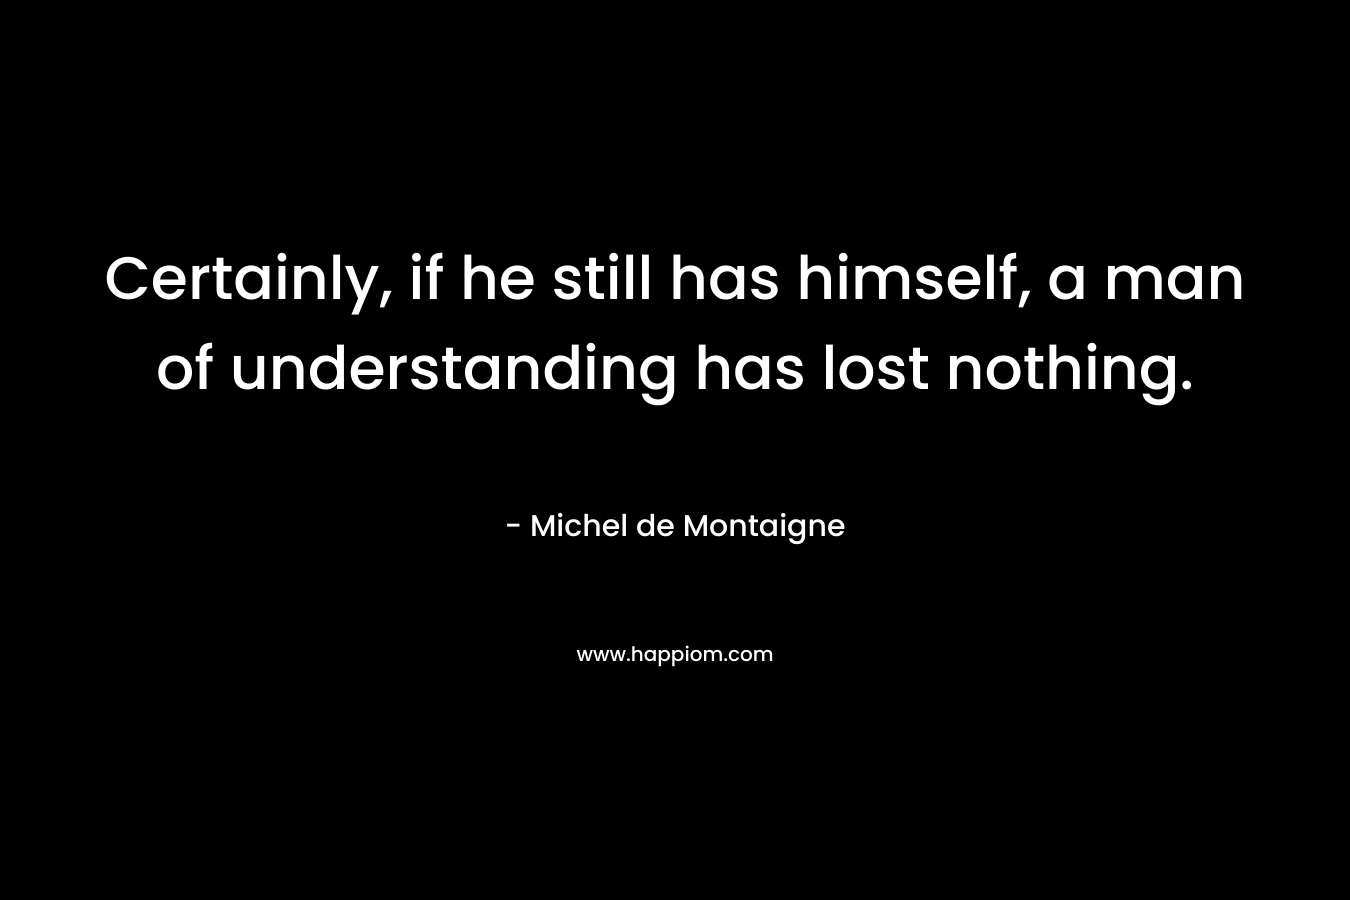 Certainly, if he still has himself, a man of understanding has lost nothing.